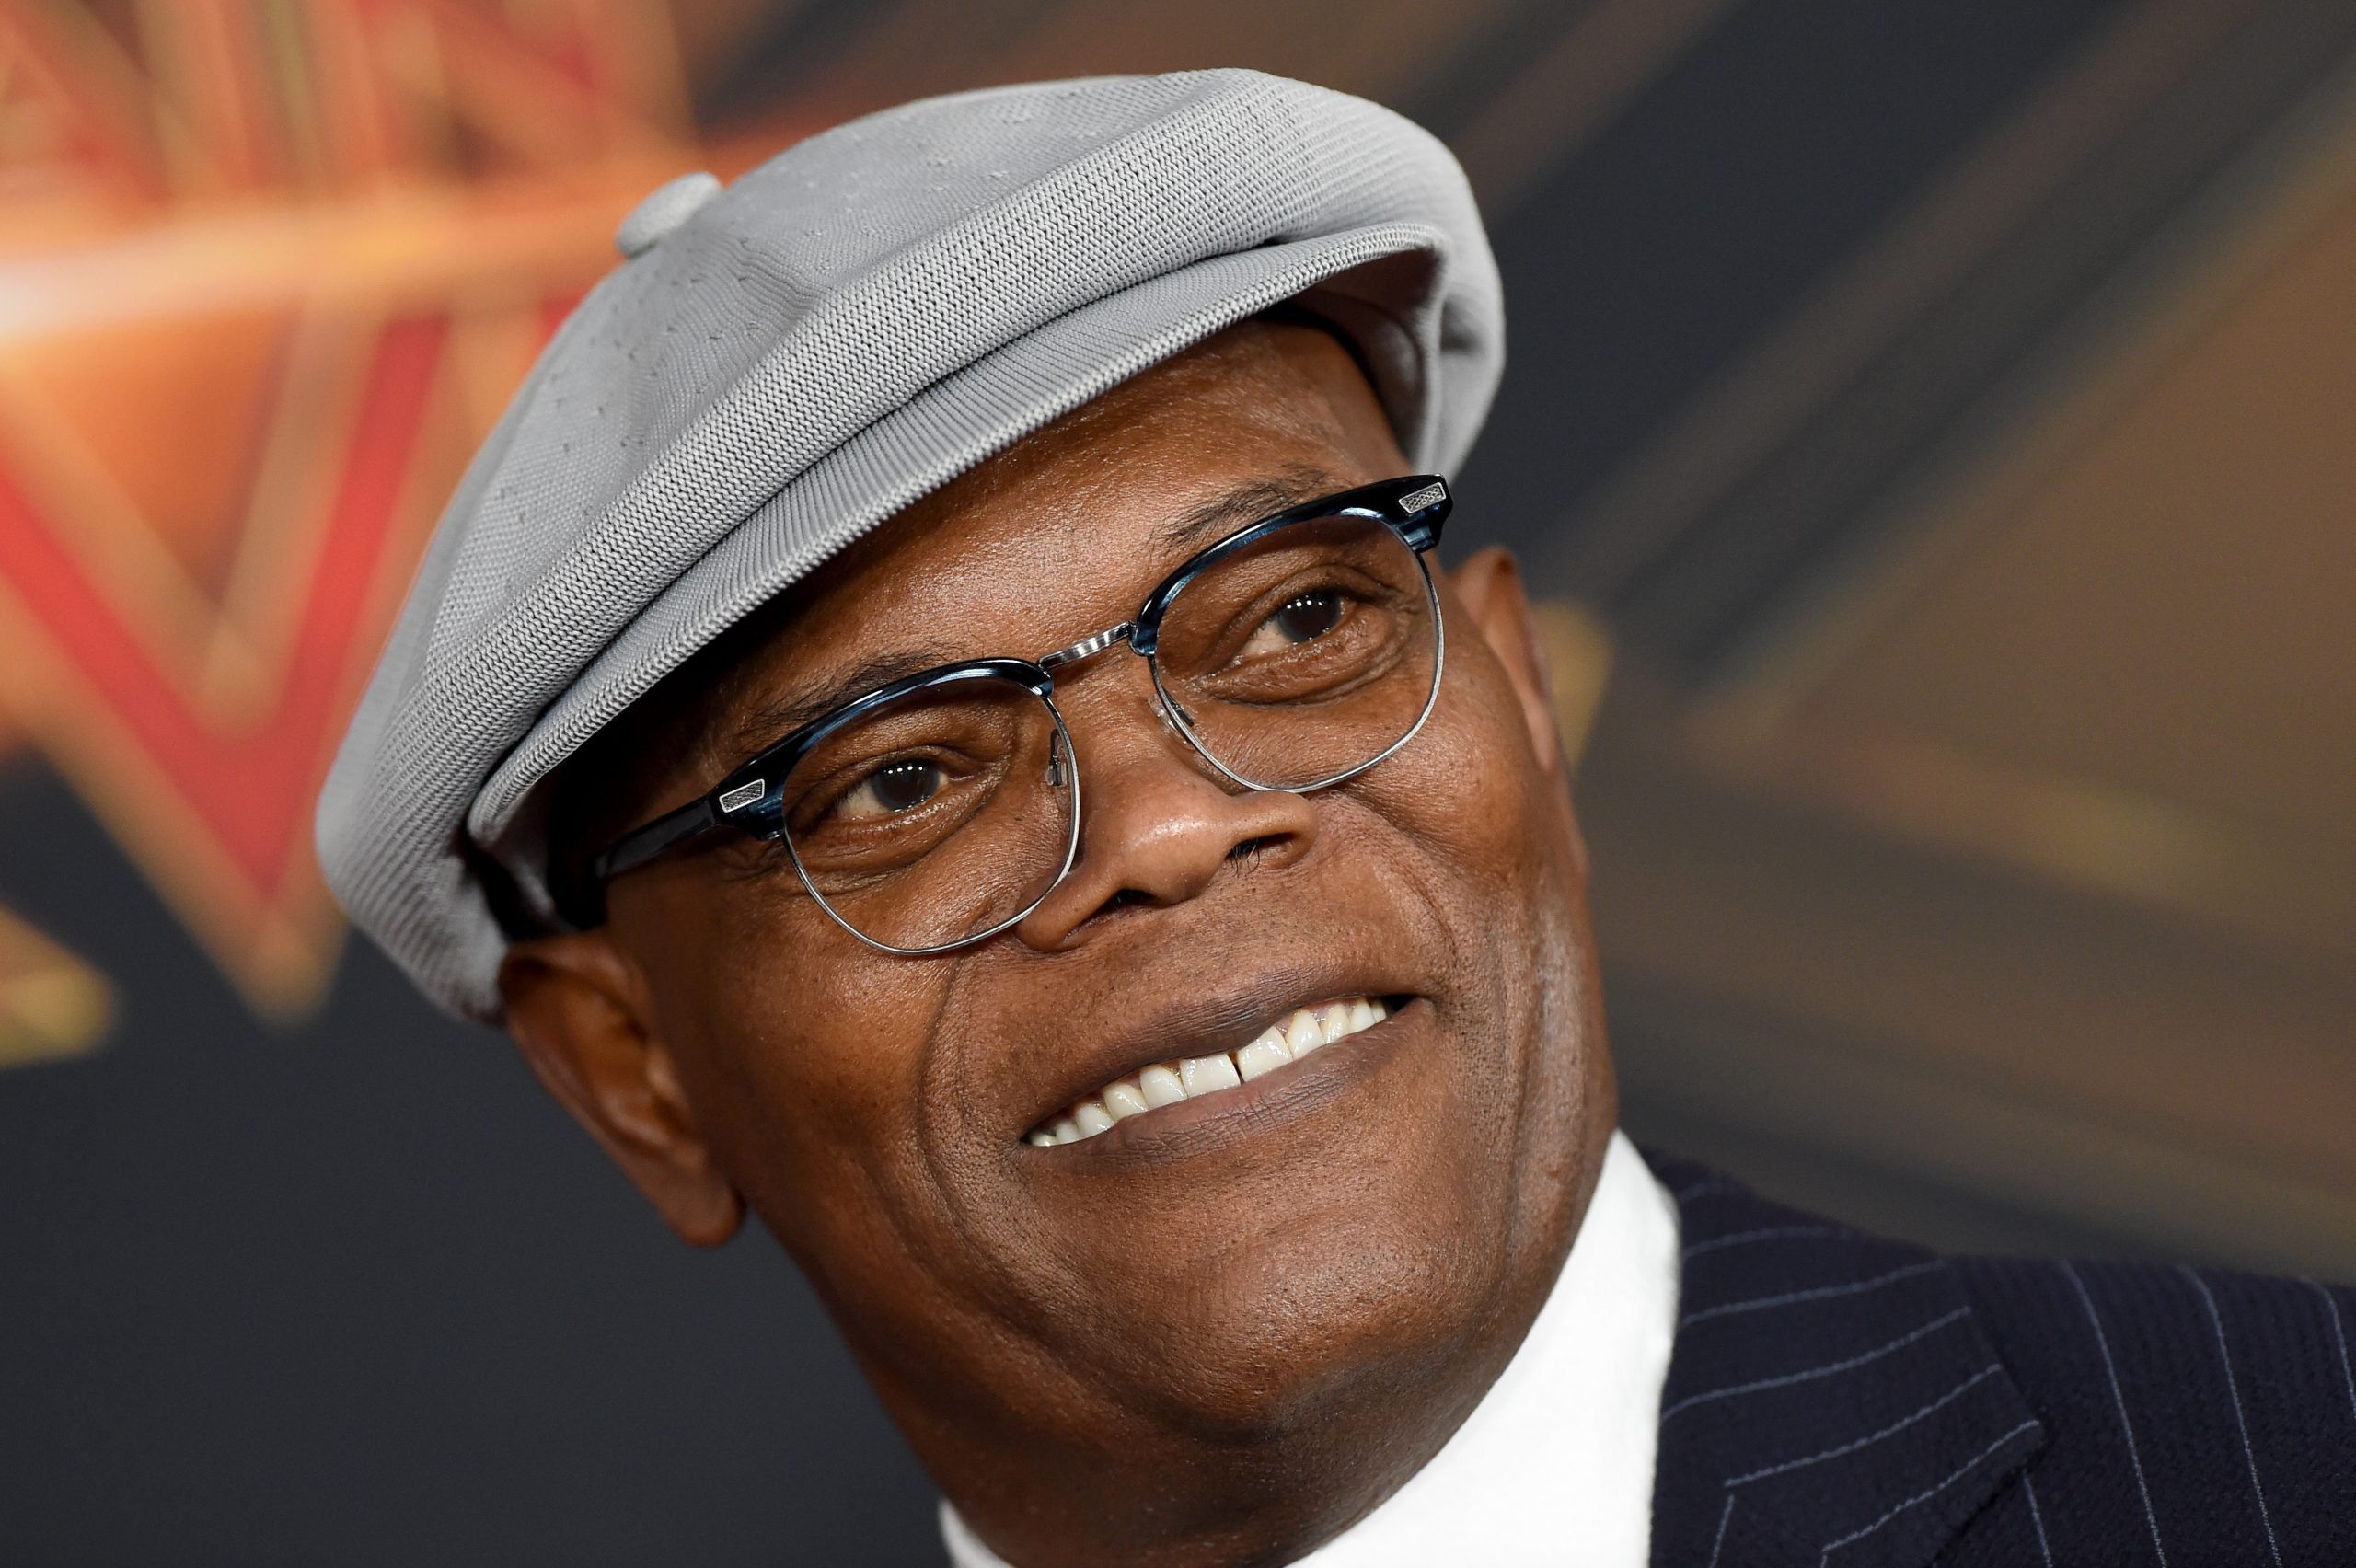 Samuel L. Jackson wearing a grey hat and suit and attending a Marvel event for his role as Nick Fury.